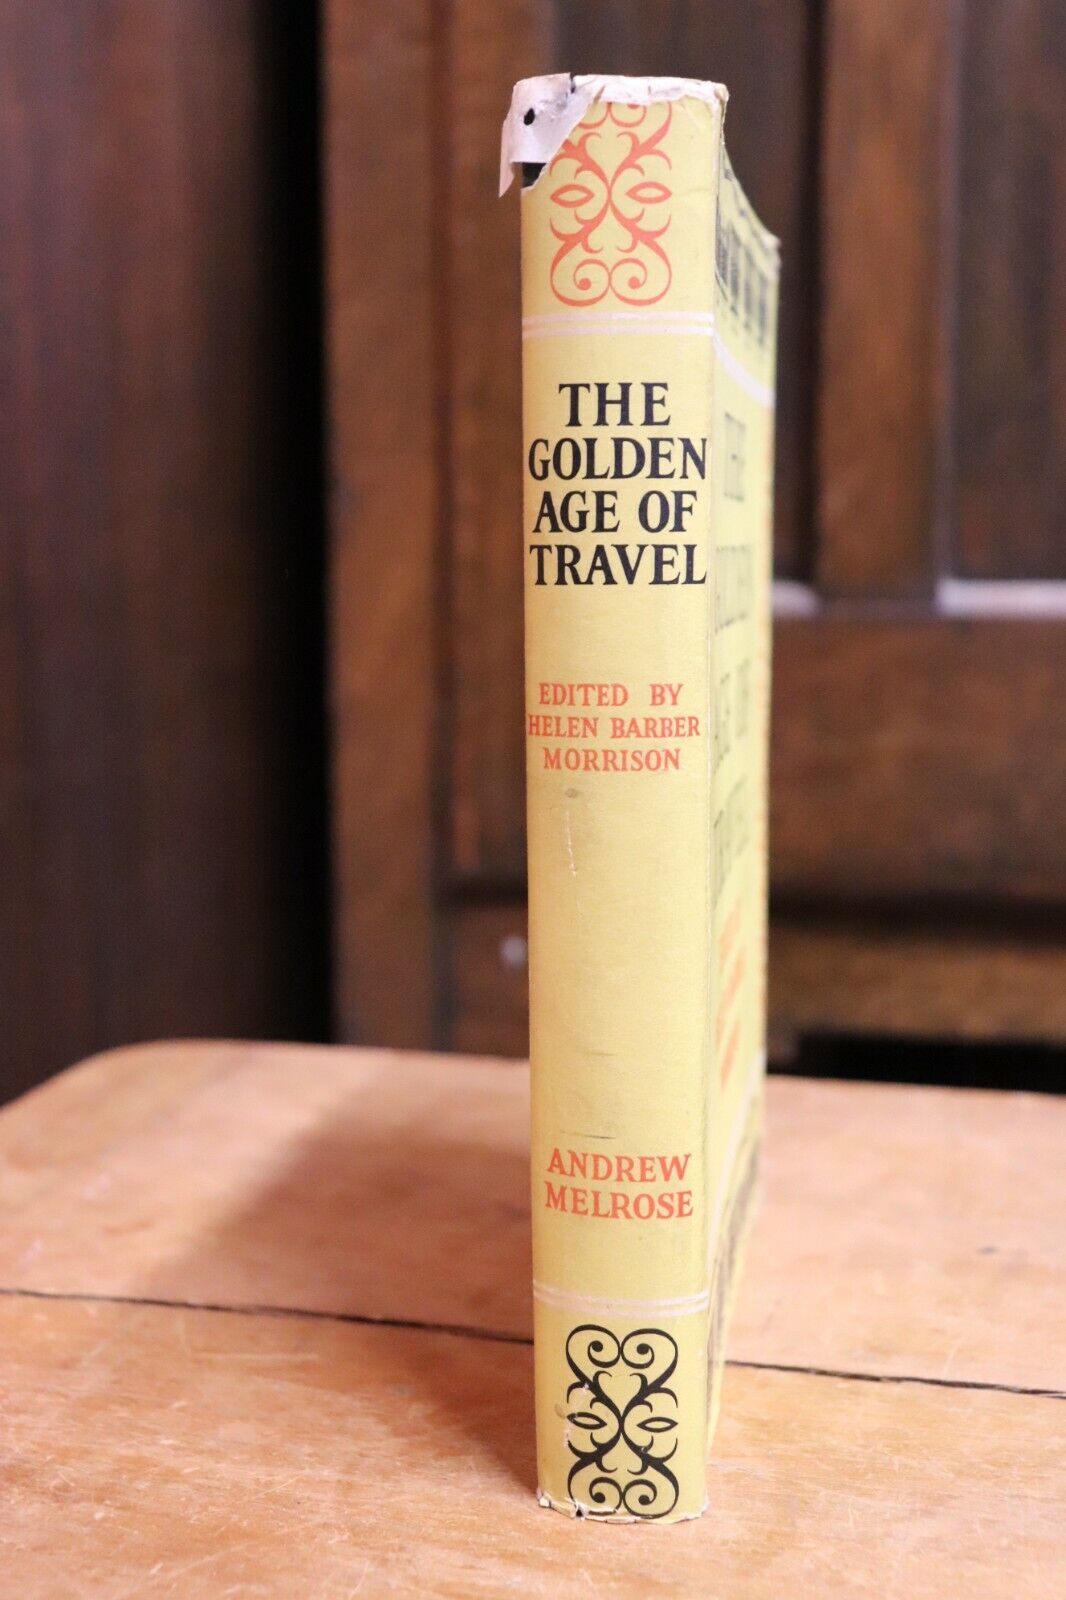 The Golden Age Of Travel - 1953 - 1st Edition - Antique Travel Book